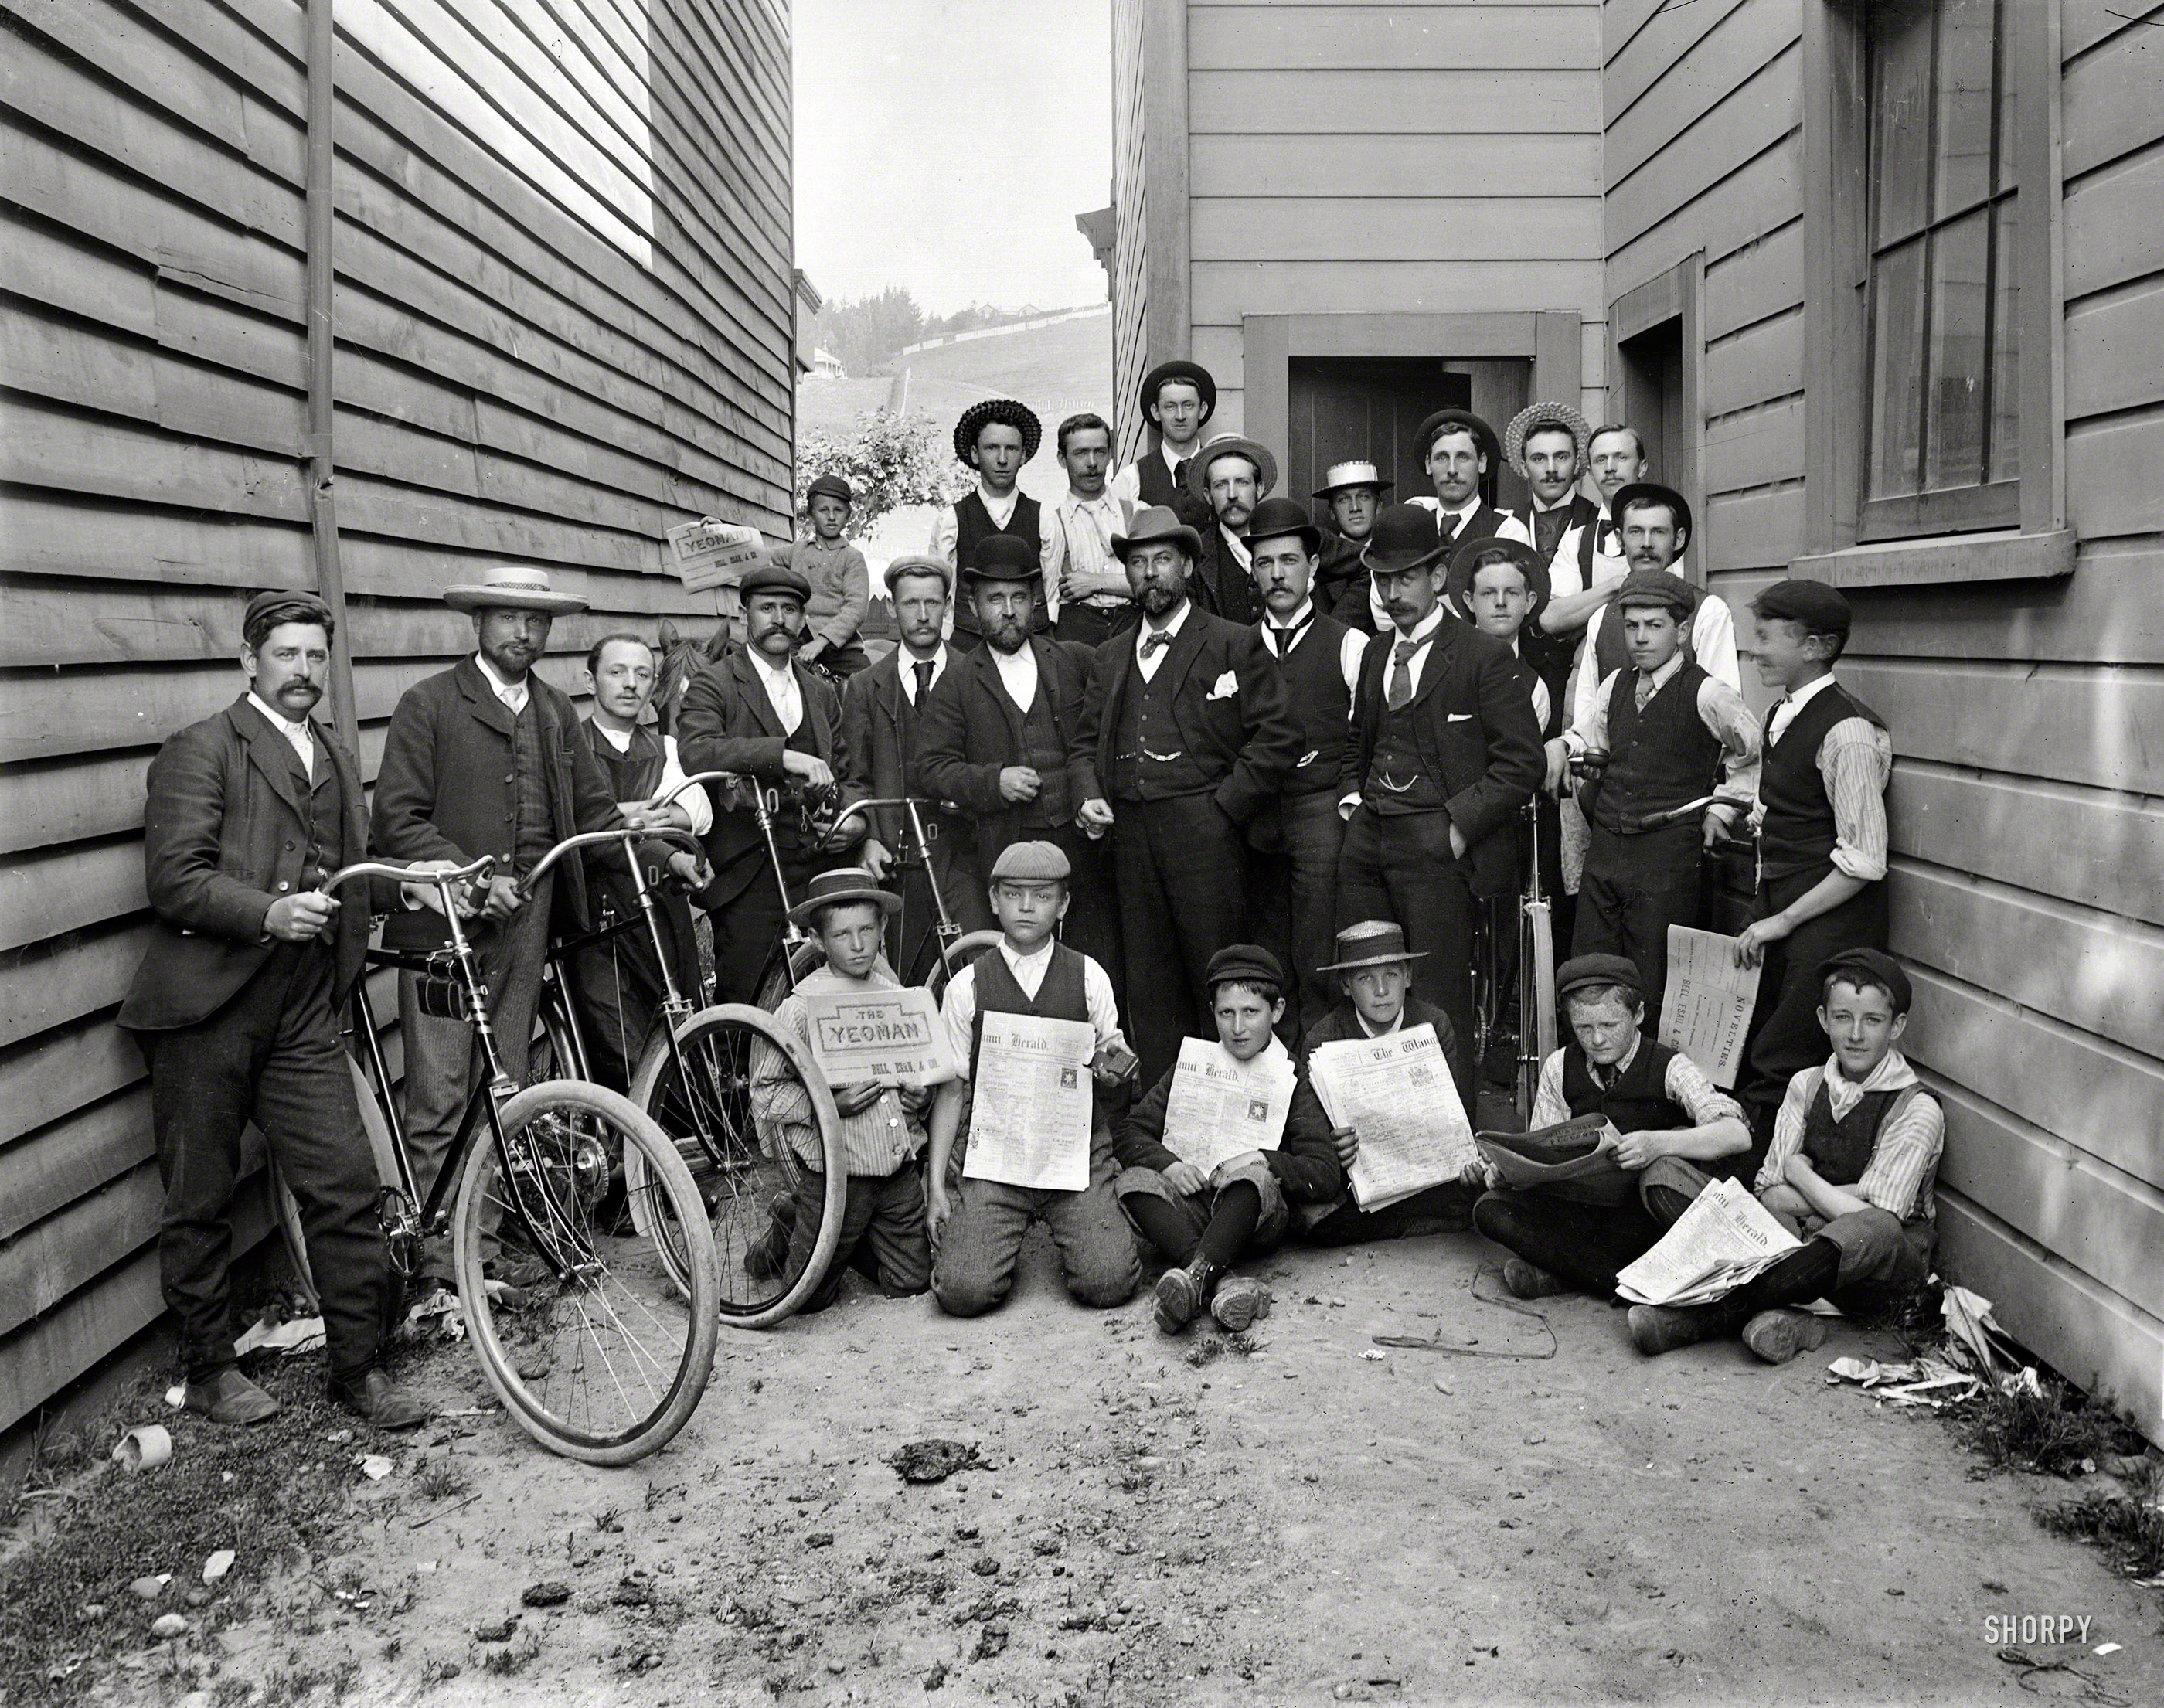 New Zealand, 1907. "Wanganui Herald newspaper staff and bicycles, photograph&shy;ed by Frank J. Denton. Newsboys holding copies of The Yeoman and Herald." Note the kid in back on the horse. Tesla Studios glass negative. View full size.